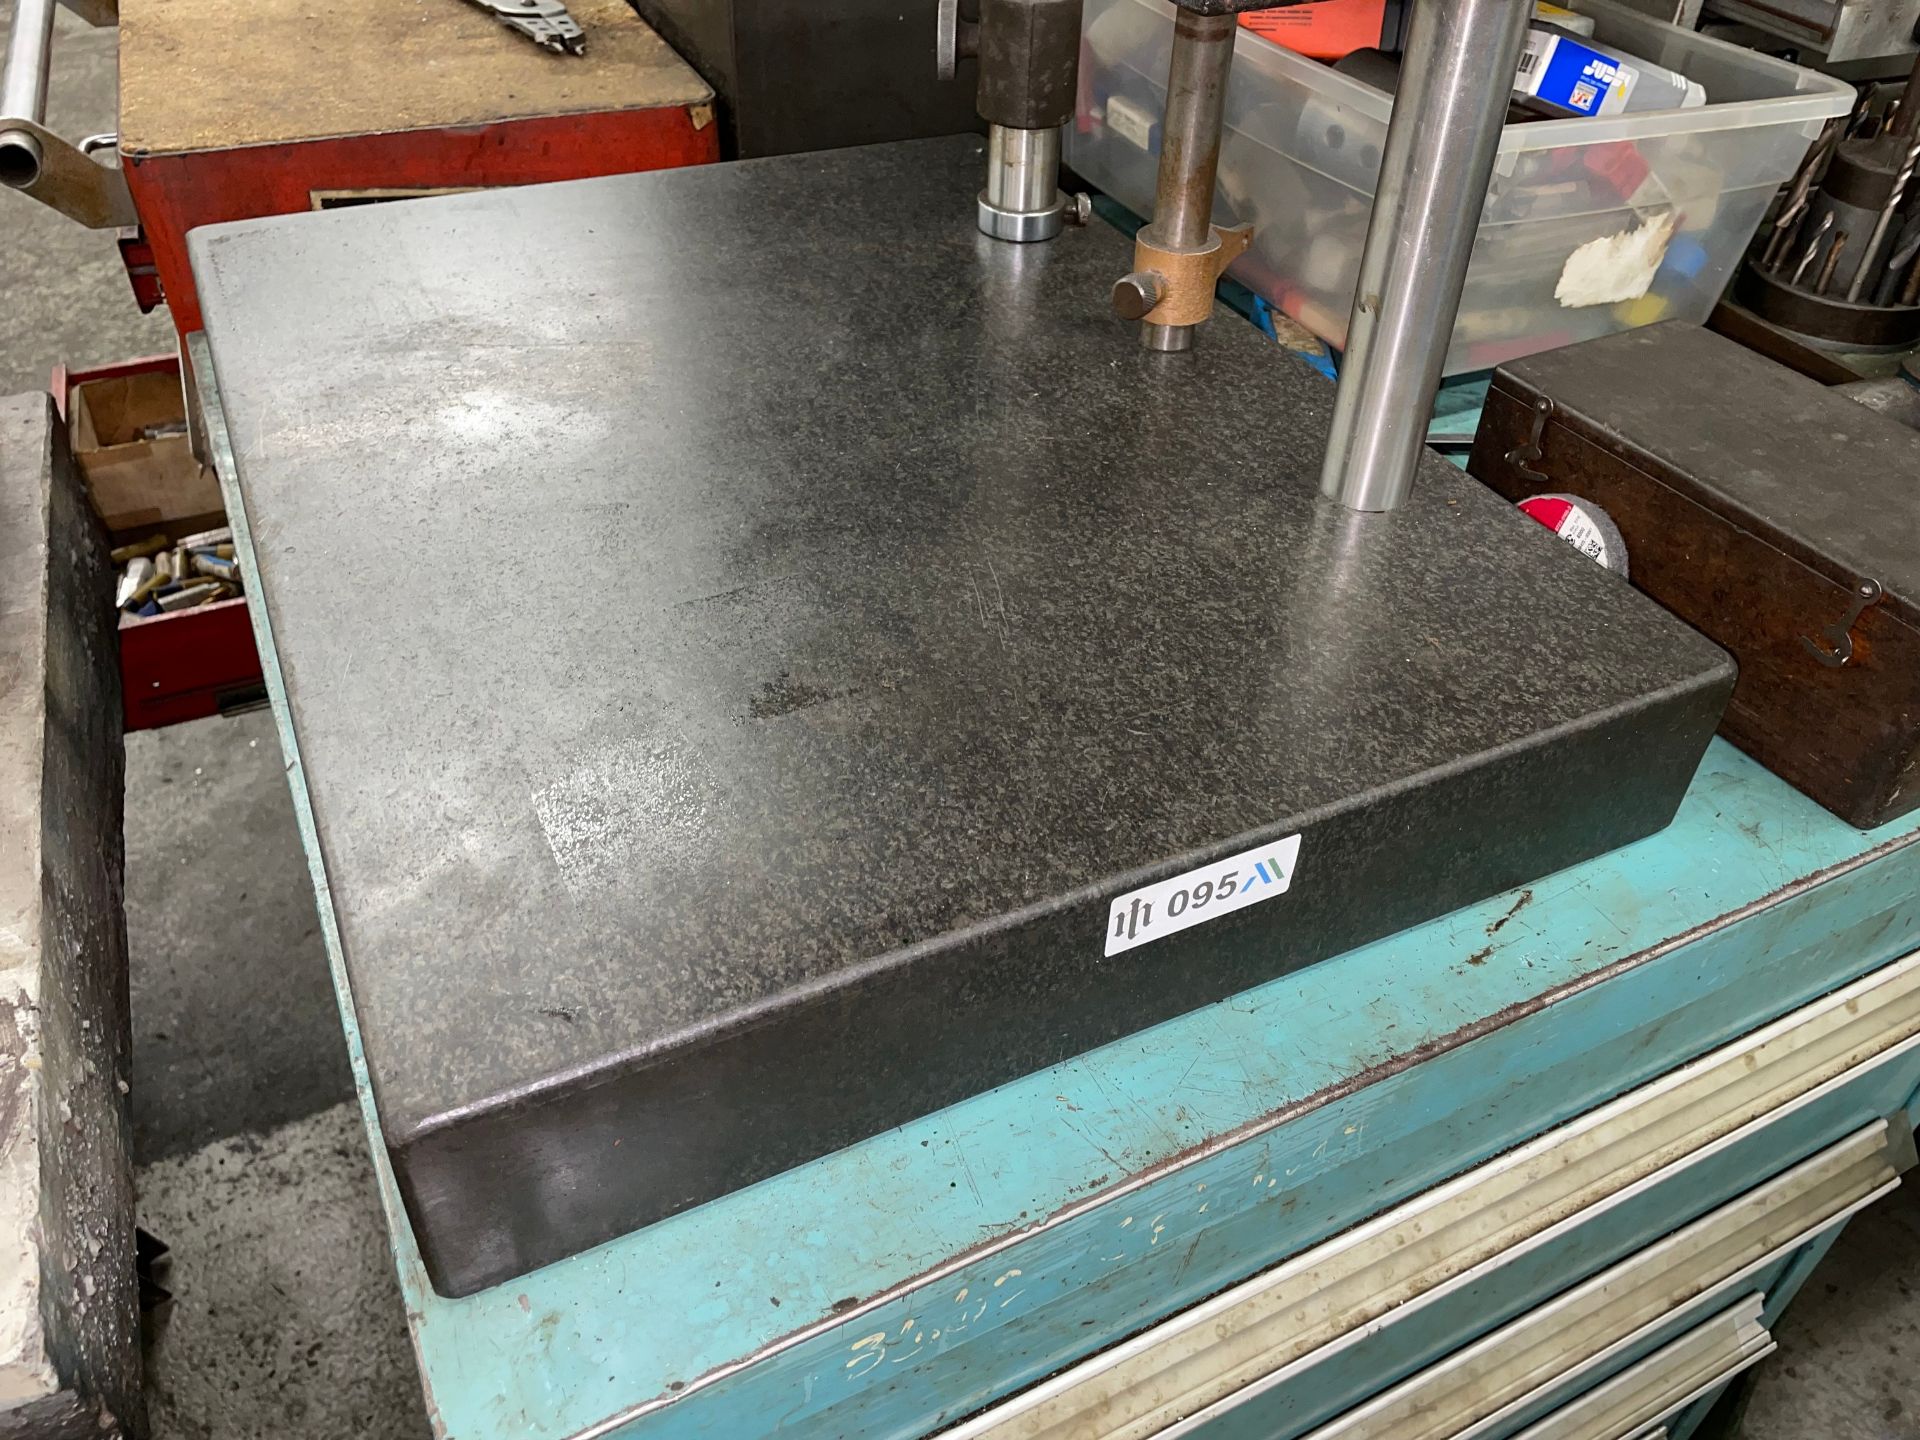 Black Granite Surface Plate, 24" x 18" x 3" with Indicator Stands - Image 3 of 3